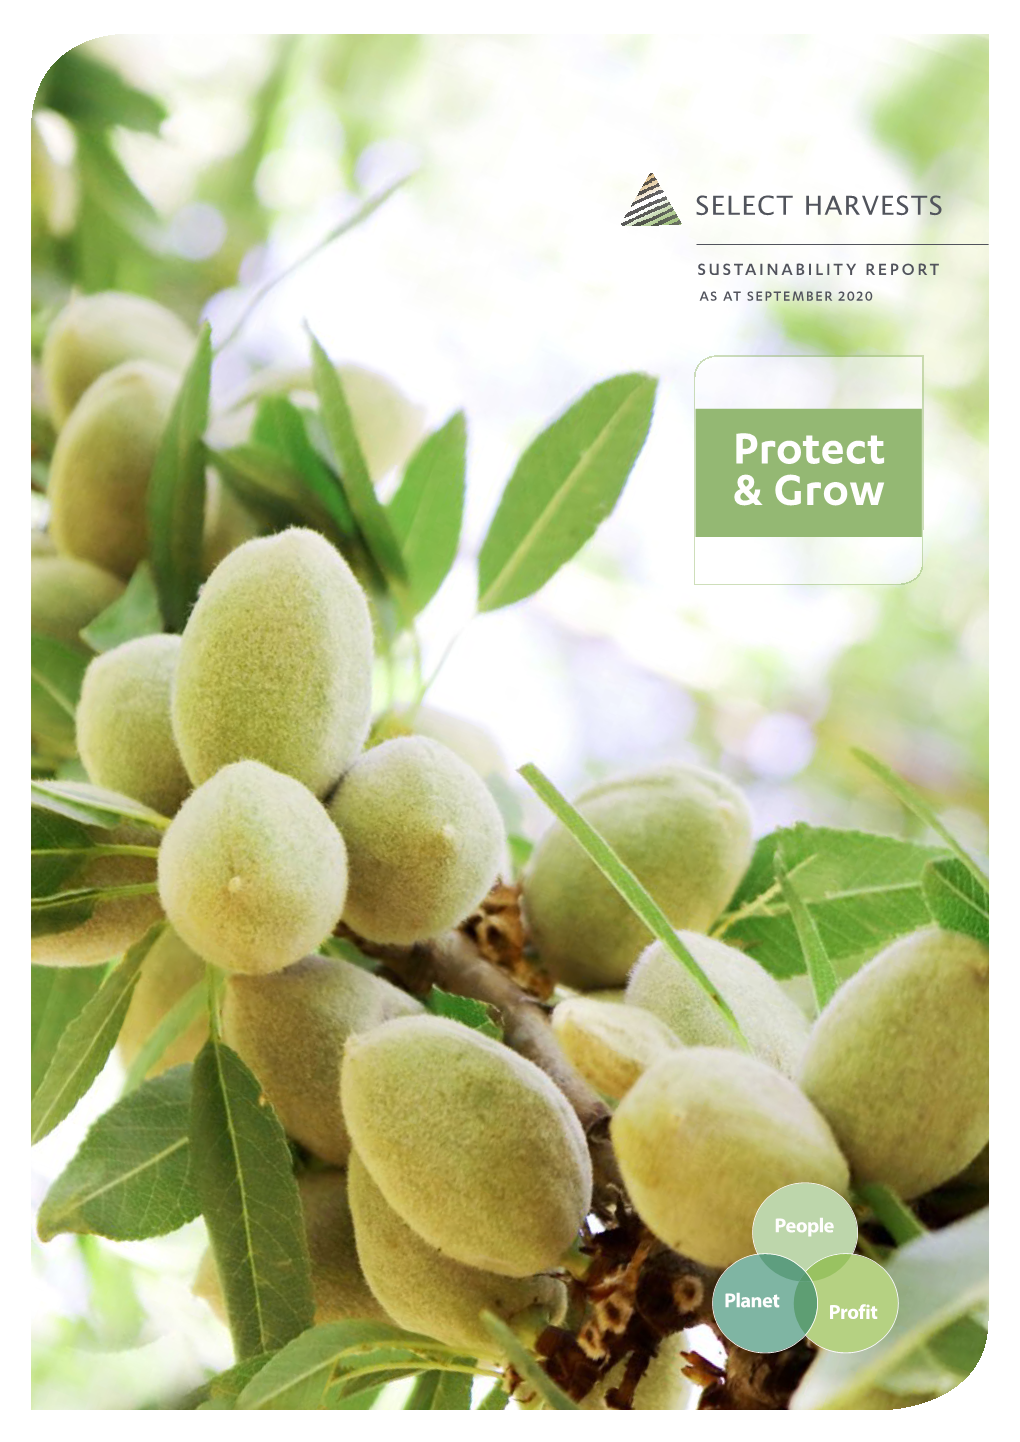 Sustainability Report As at September 2020 Select Harvests Sustainability Report 2019 Protect & Grow